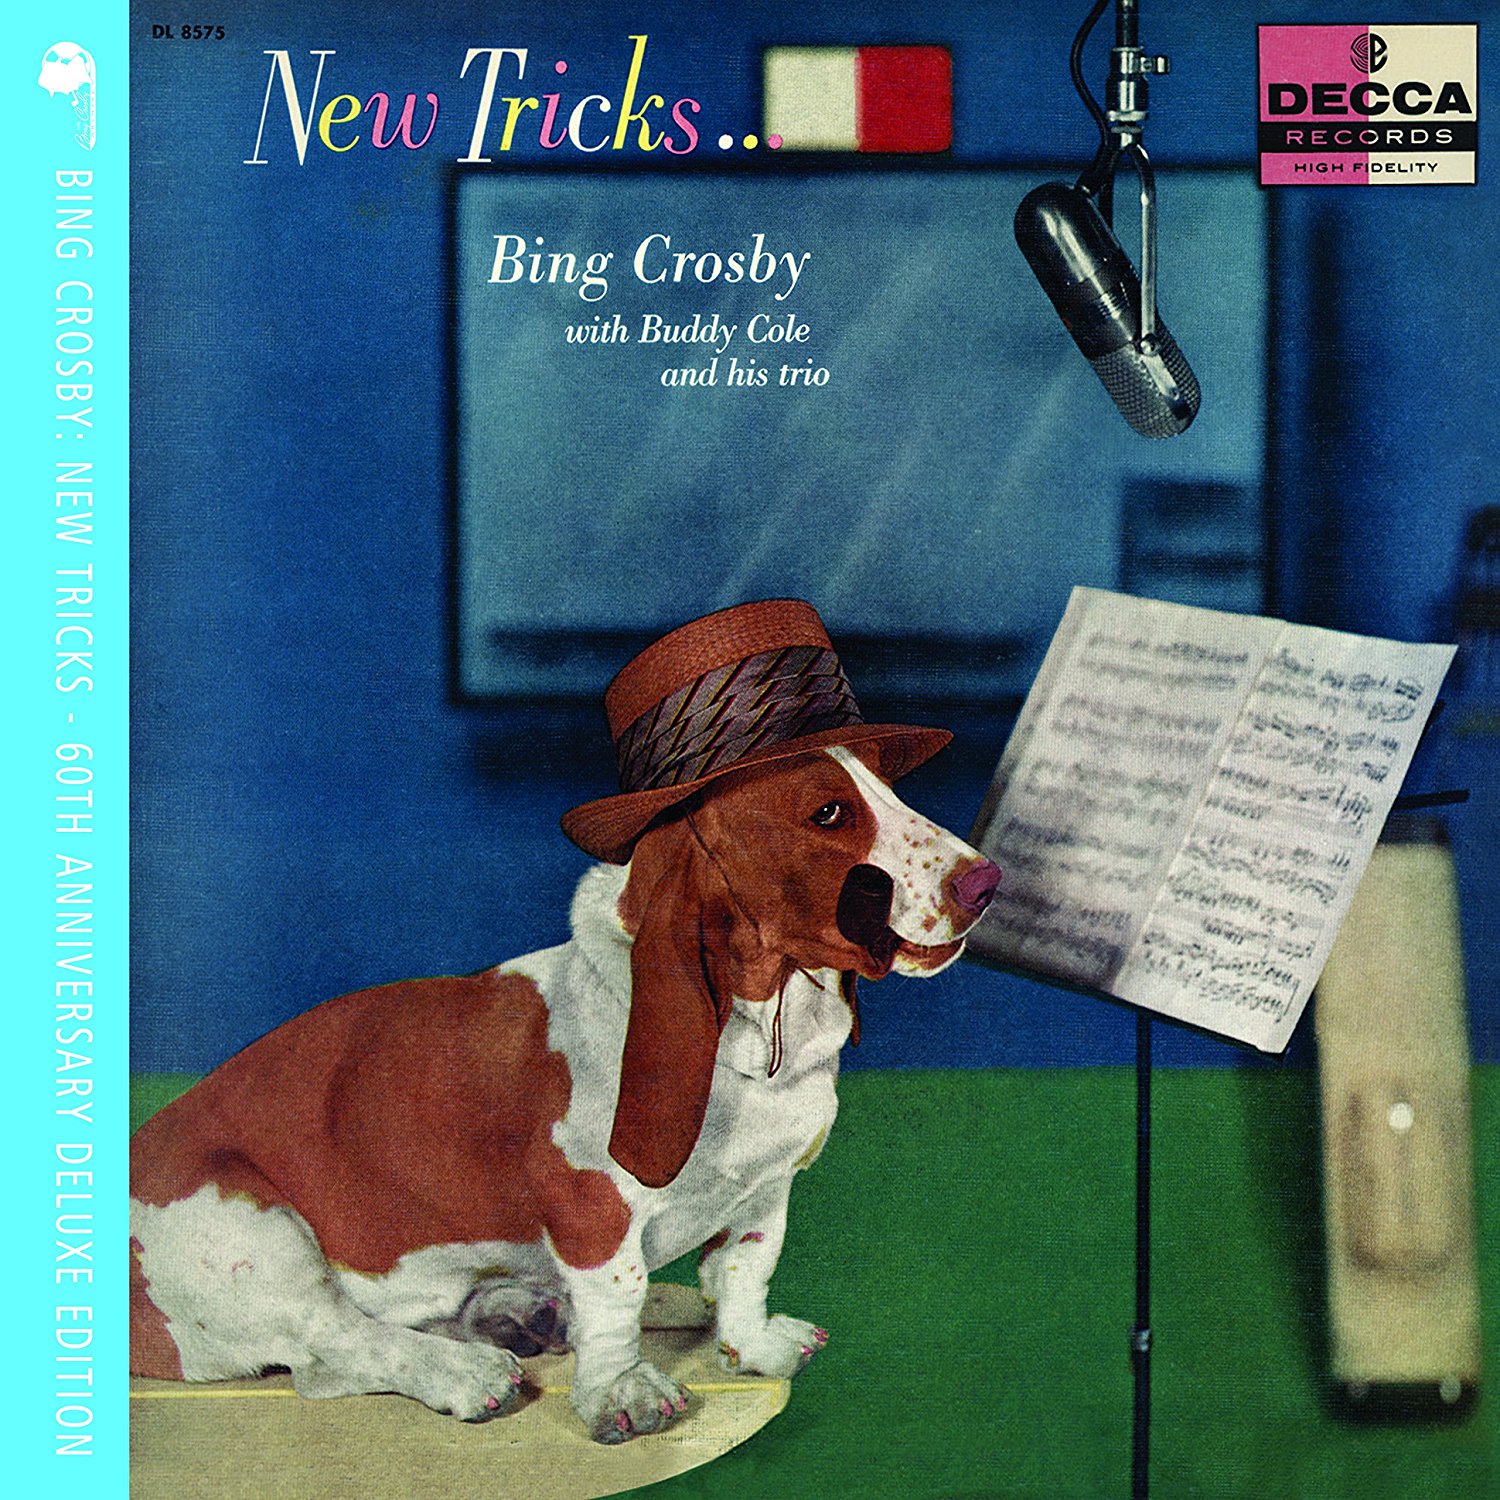 Bing Crosby new Tricks 60th Anniversary Deluxe Edition